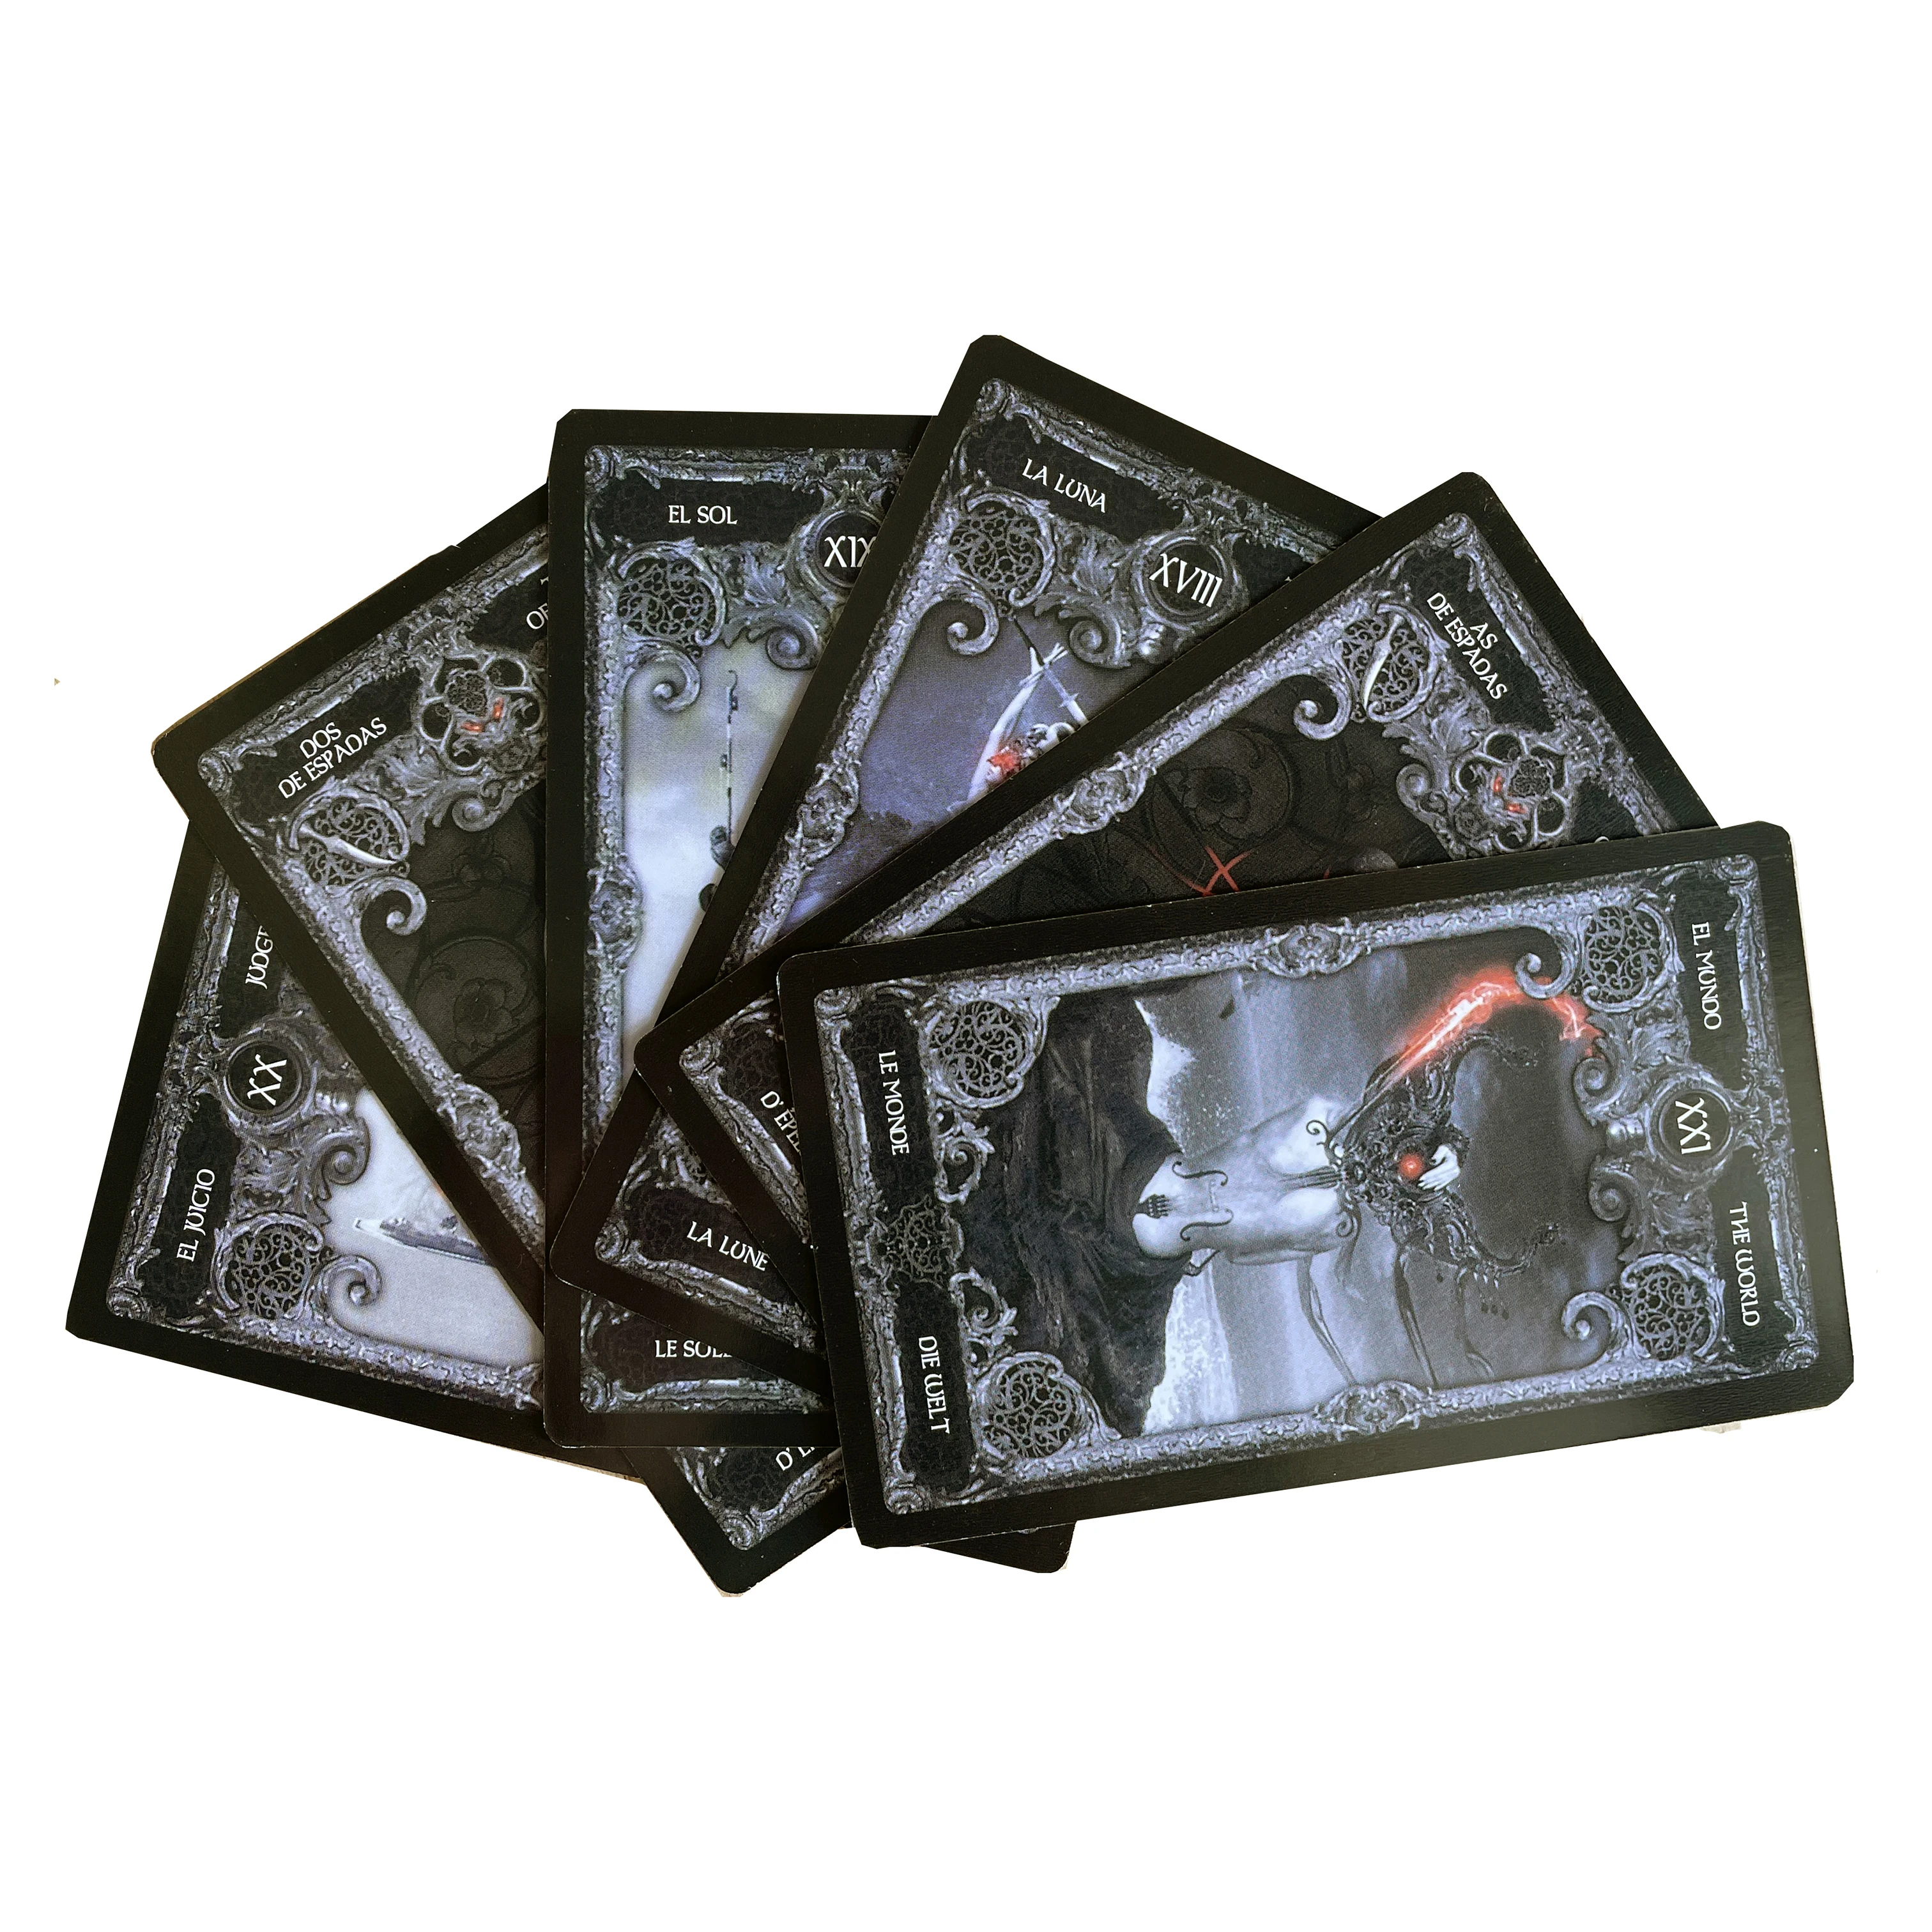 Dark tarot card deck for beginners , Unique tarot cards deck with guidebook , Full tarot decks 78 cards ,Beautiful oracle cards russian golden tarot deck for work with guide book prophet oracle cards divination fortune telling classic 78 cards 12x7cm